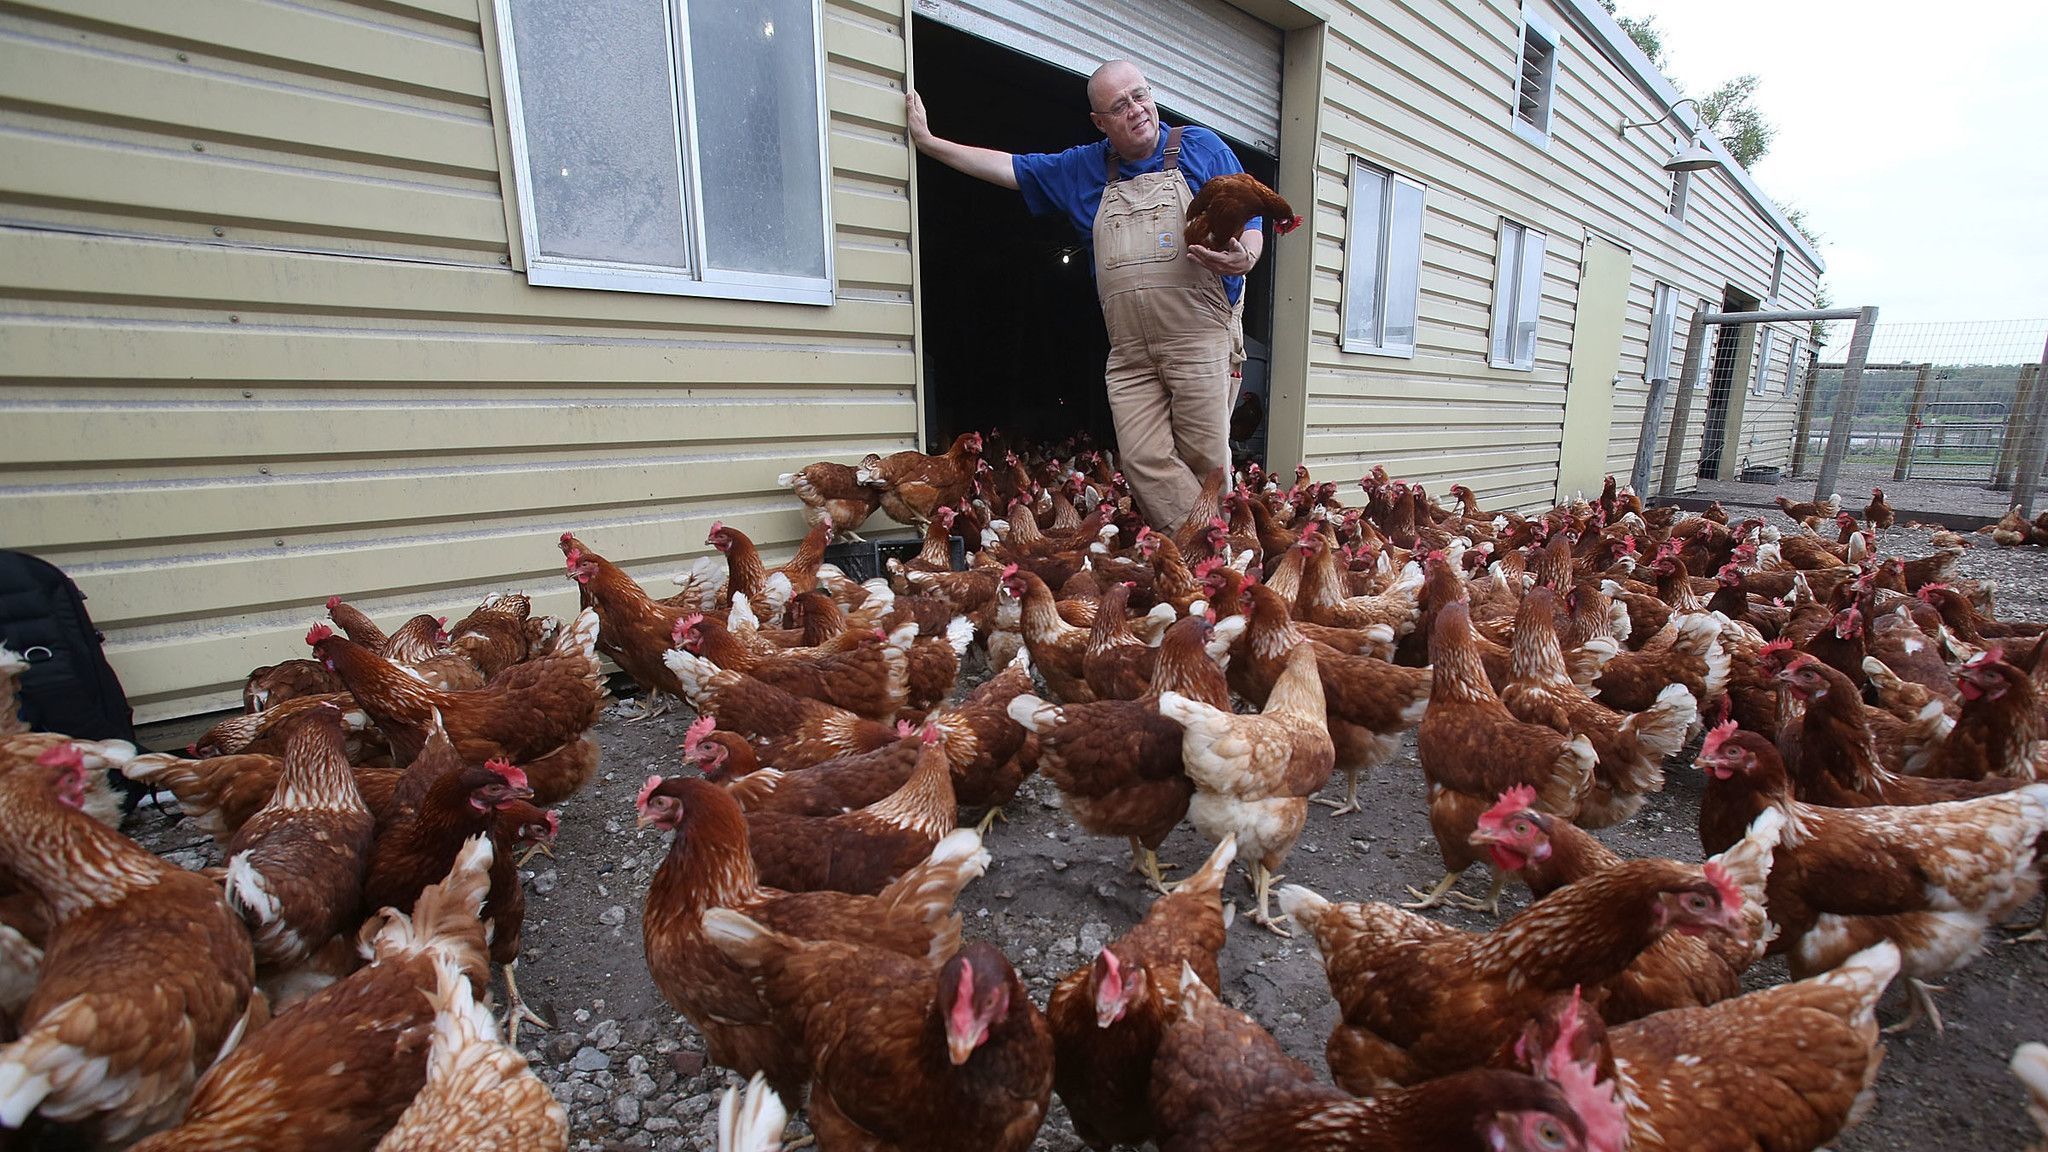 Dale Volkert, Farmer/Owner of Lake Meadow Naturals, Ocoee, Florida,who is an egg farmer raises chick